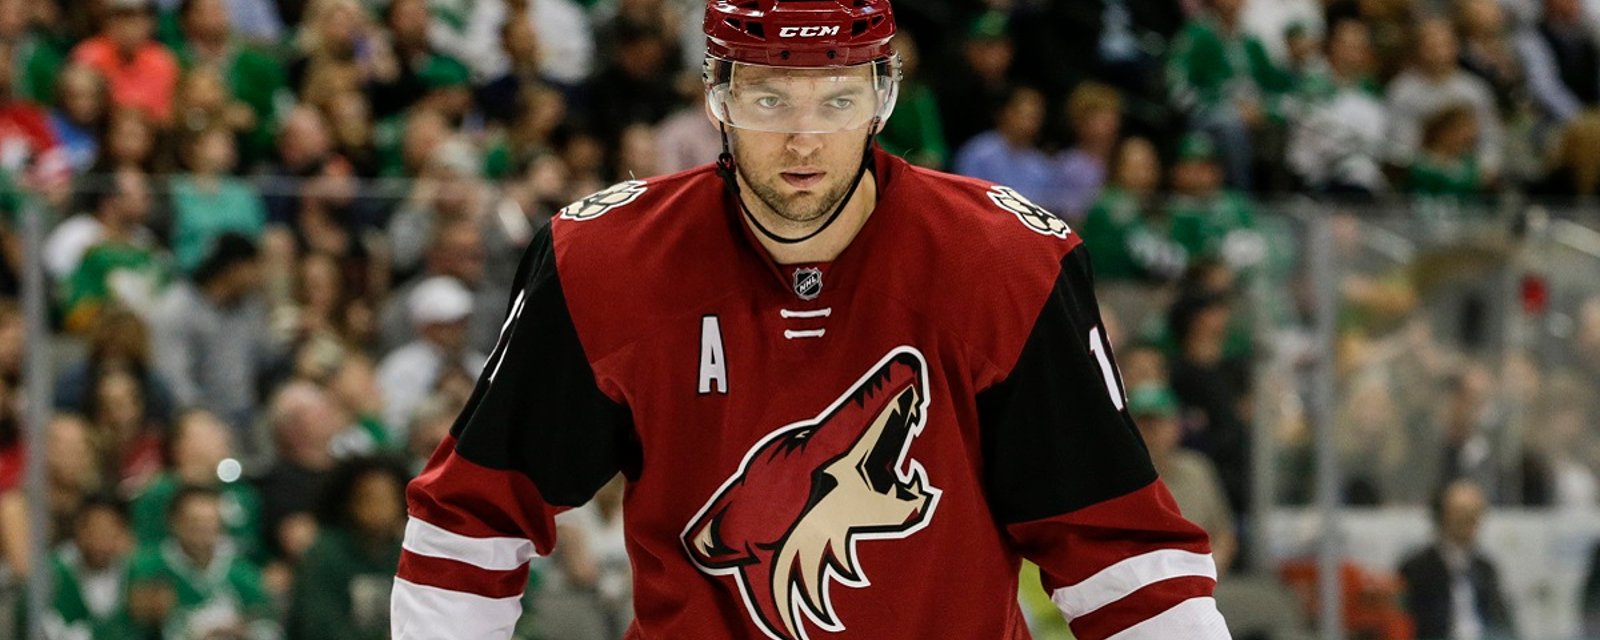 Martin Hanzal will retire as a result of his back injury.